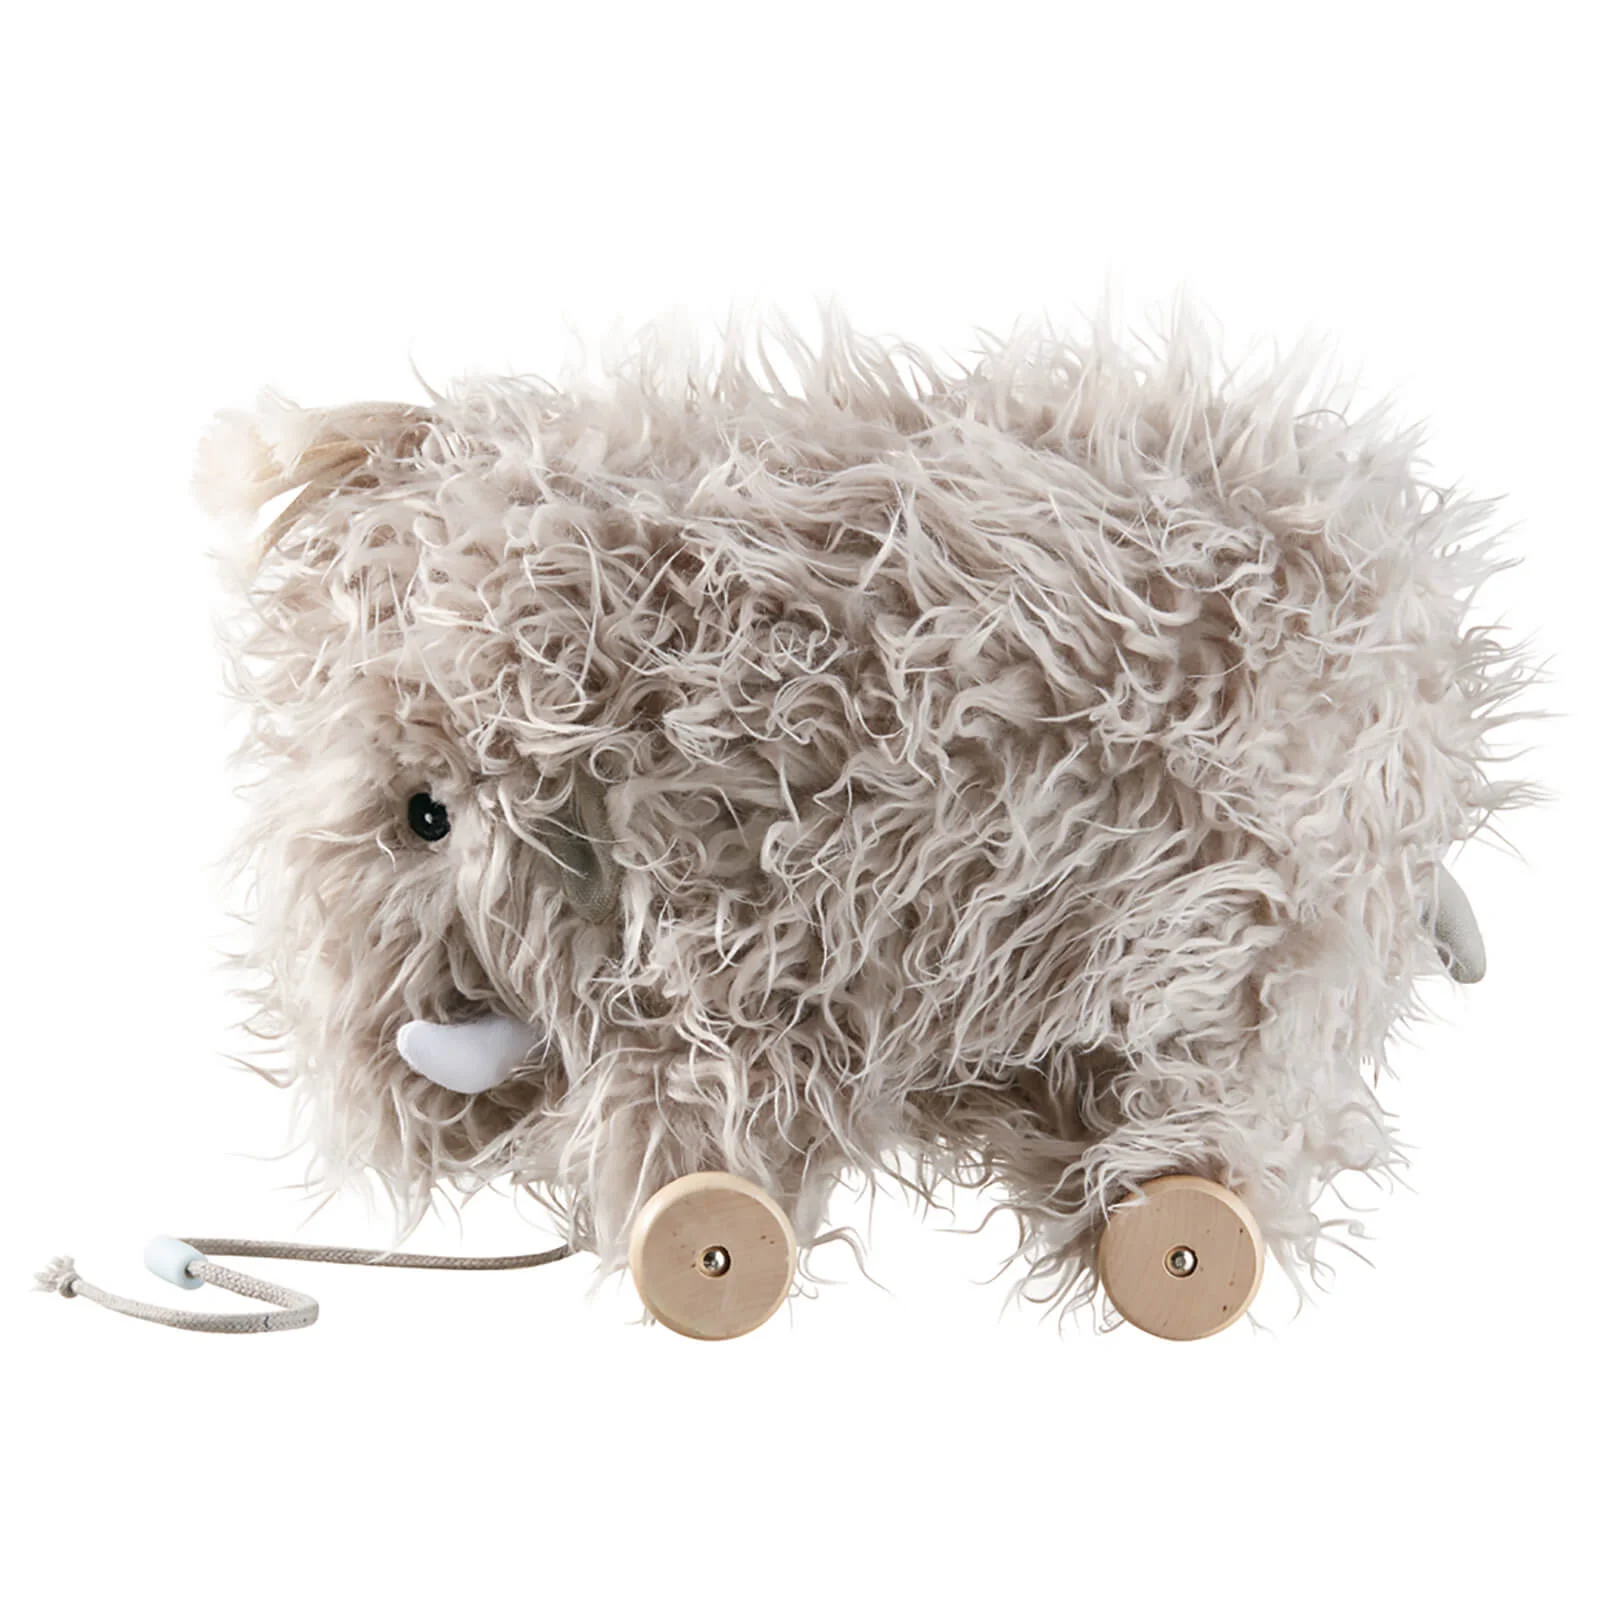 Kids Concept Neo Wooden Toy - Mammoth Image 1